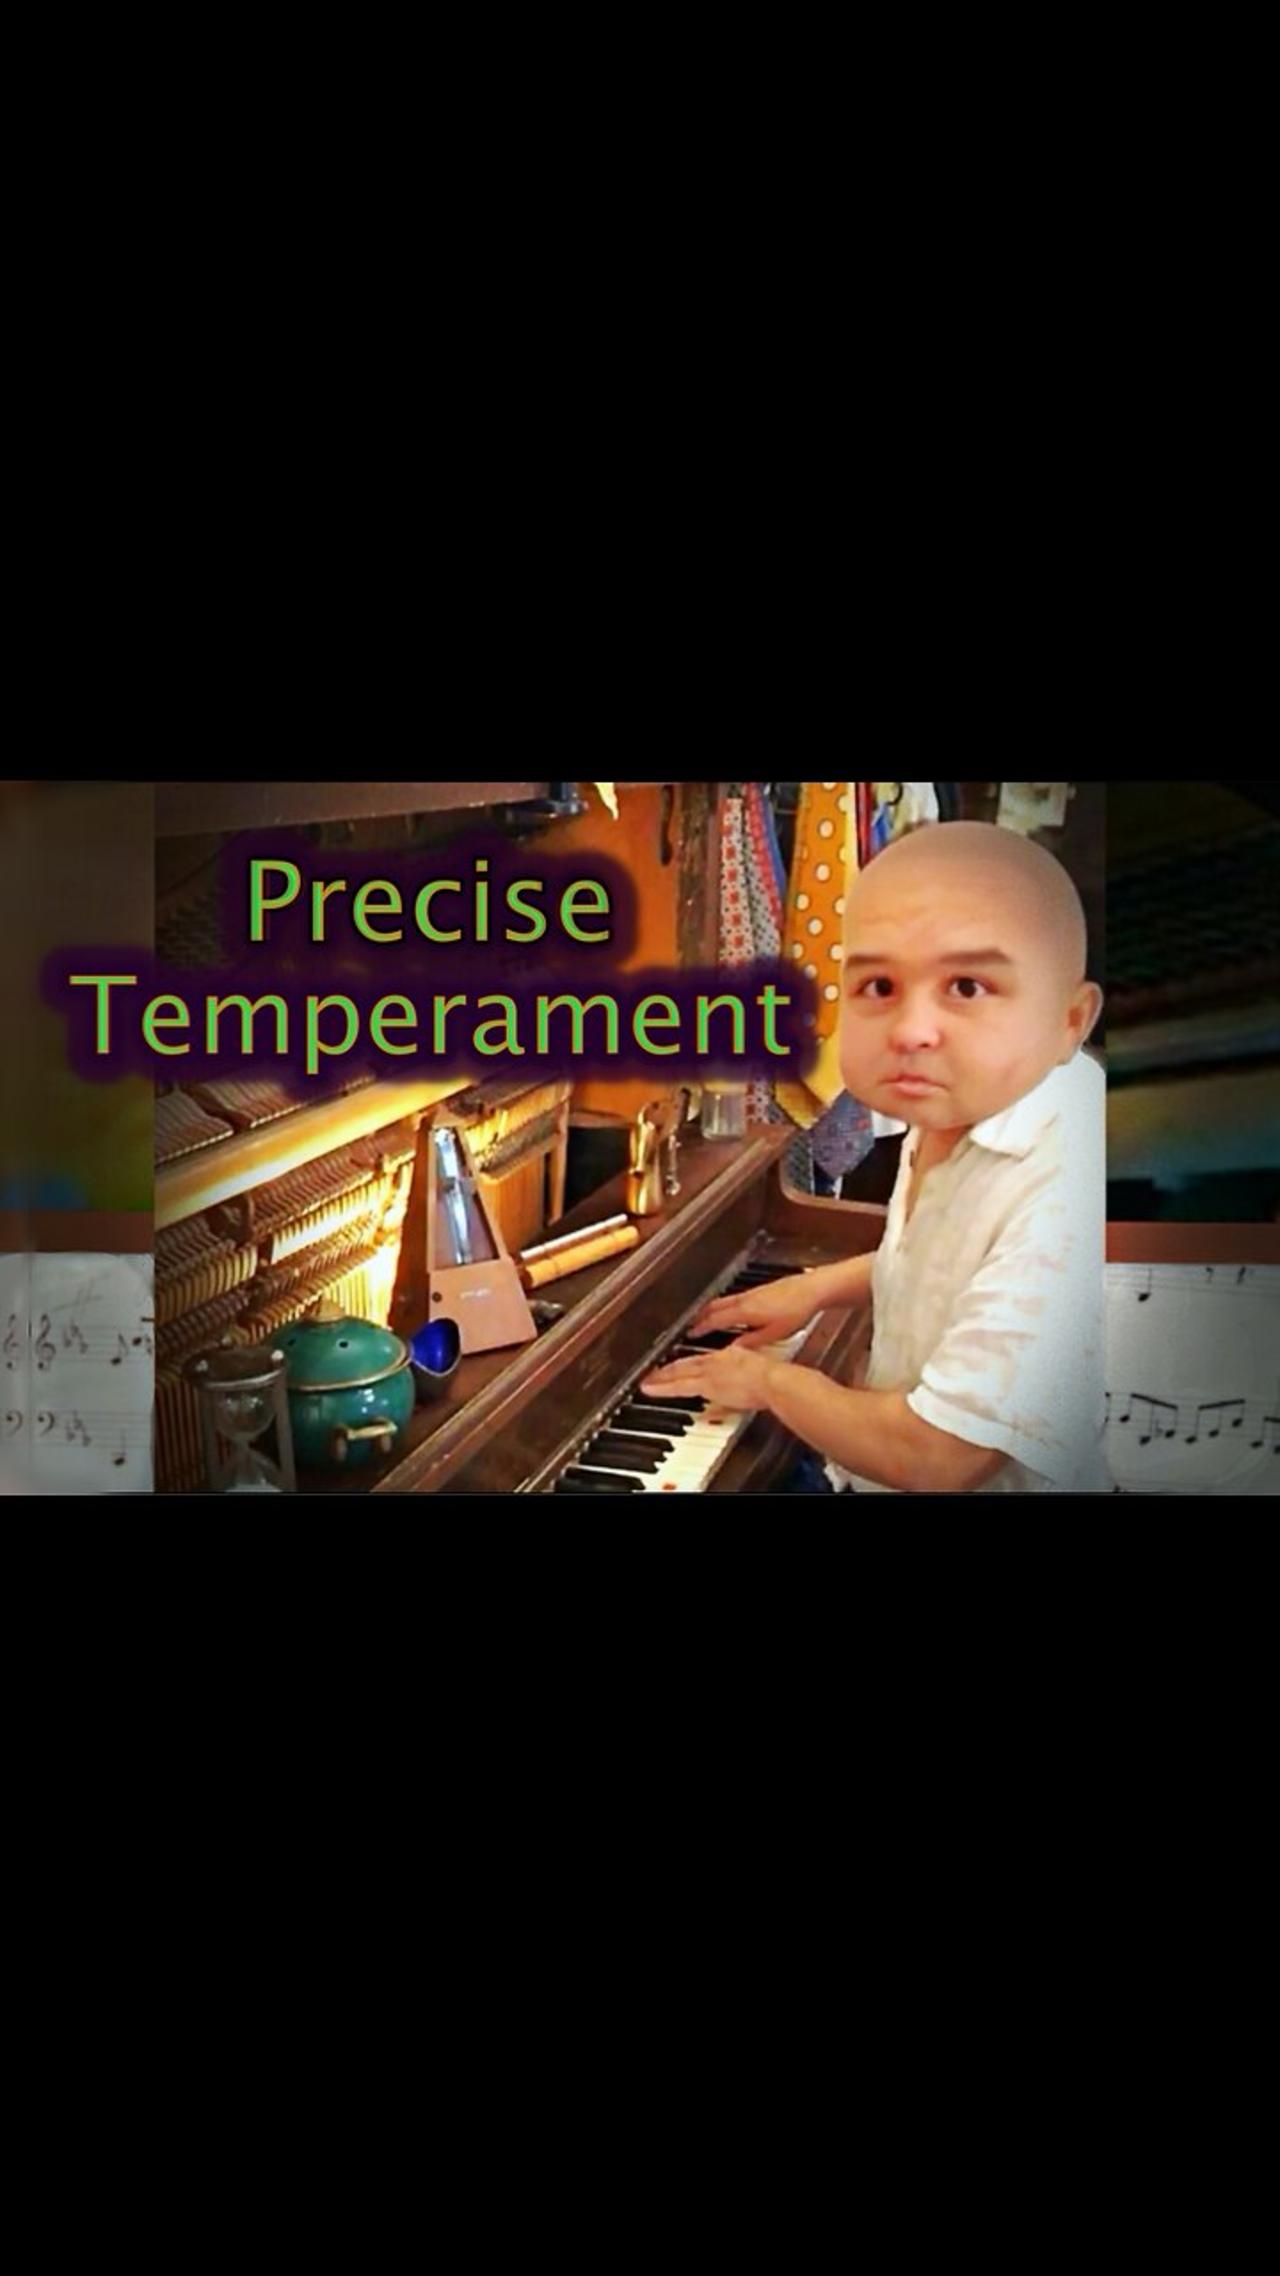 Let's Hear the New Precise Temperament Tuning! - Robert Edward Grant. Banned from YouTube